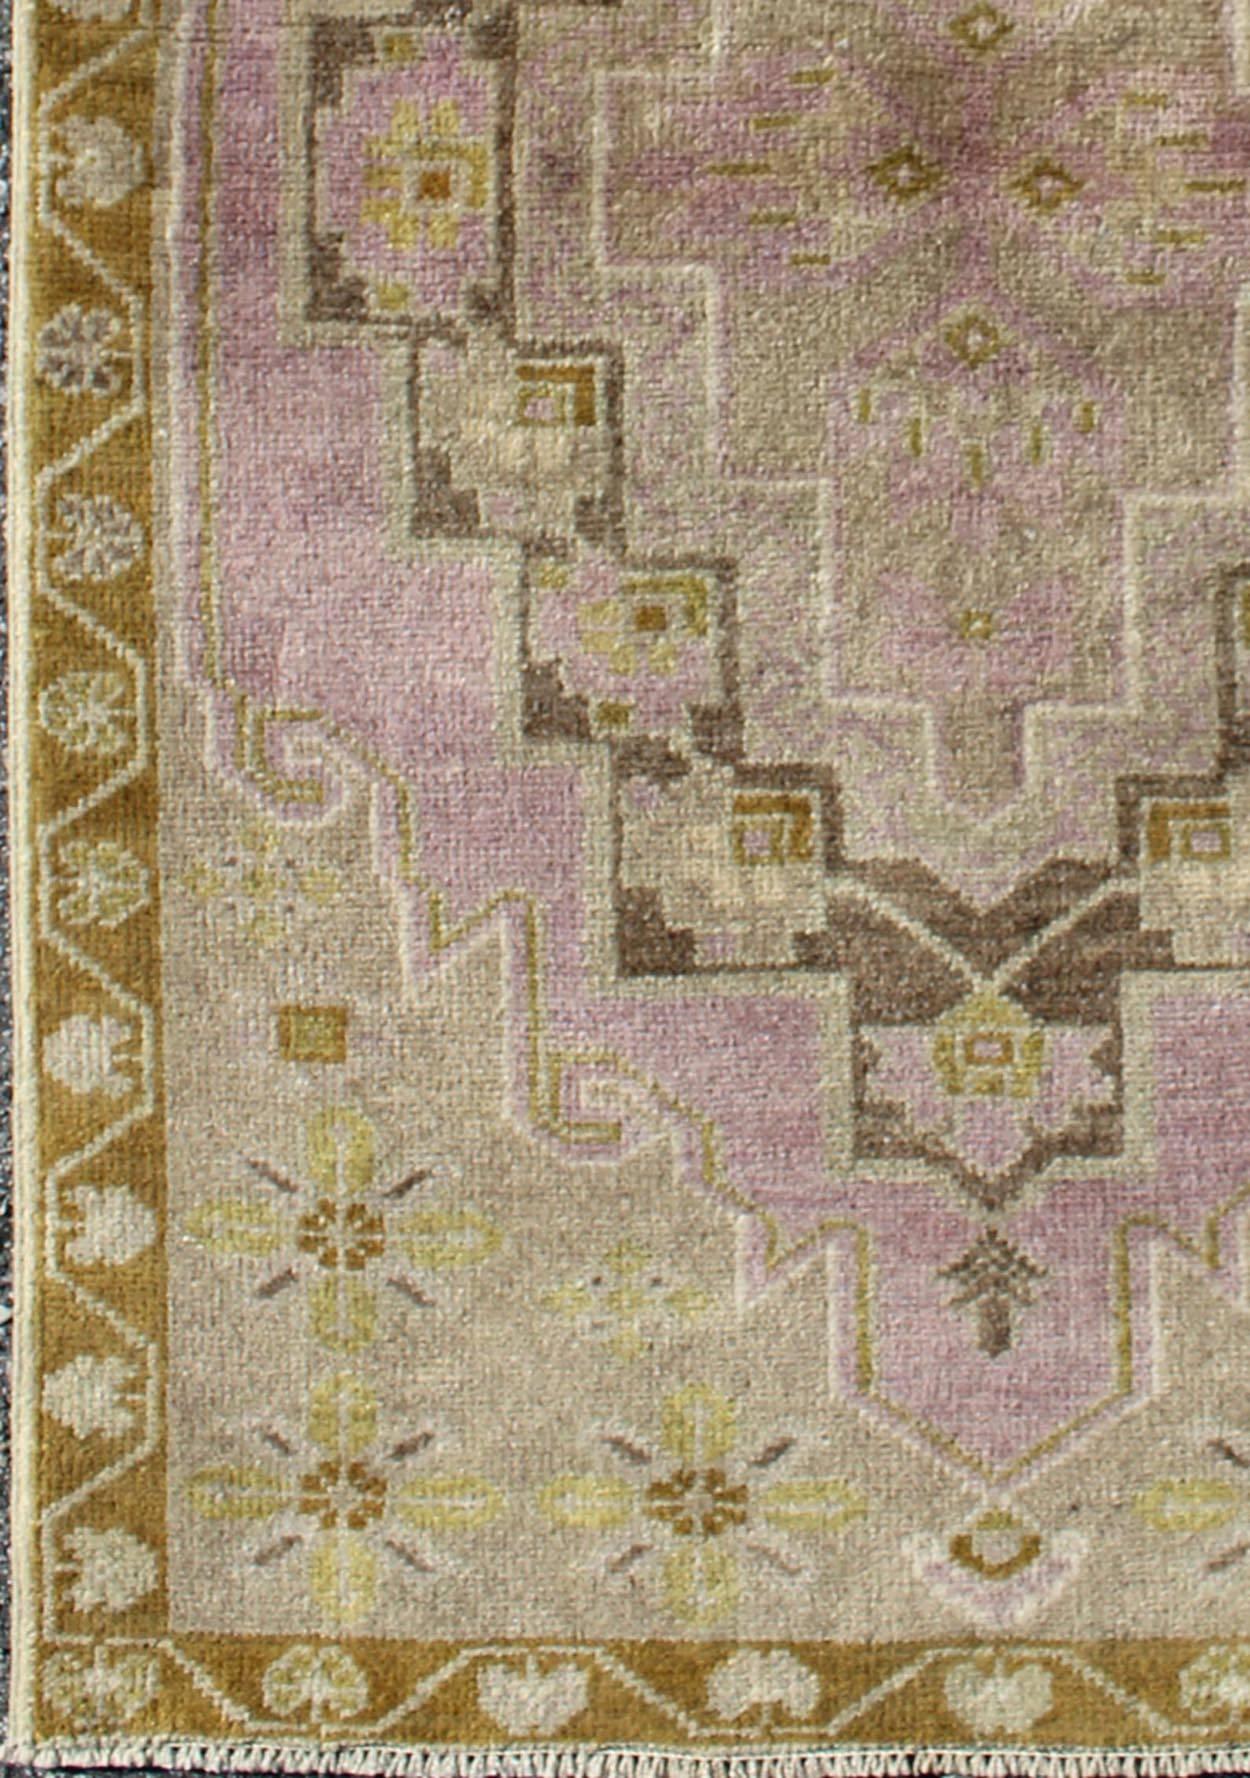 This vintage Turkish oushak rug features a unique blend of colors and an intricately beautiful design. The multi-layered central medallion is complemented by a symmetrical set of floral motifs in the surrounding field and border. The various shades